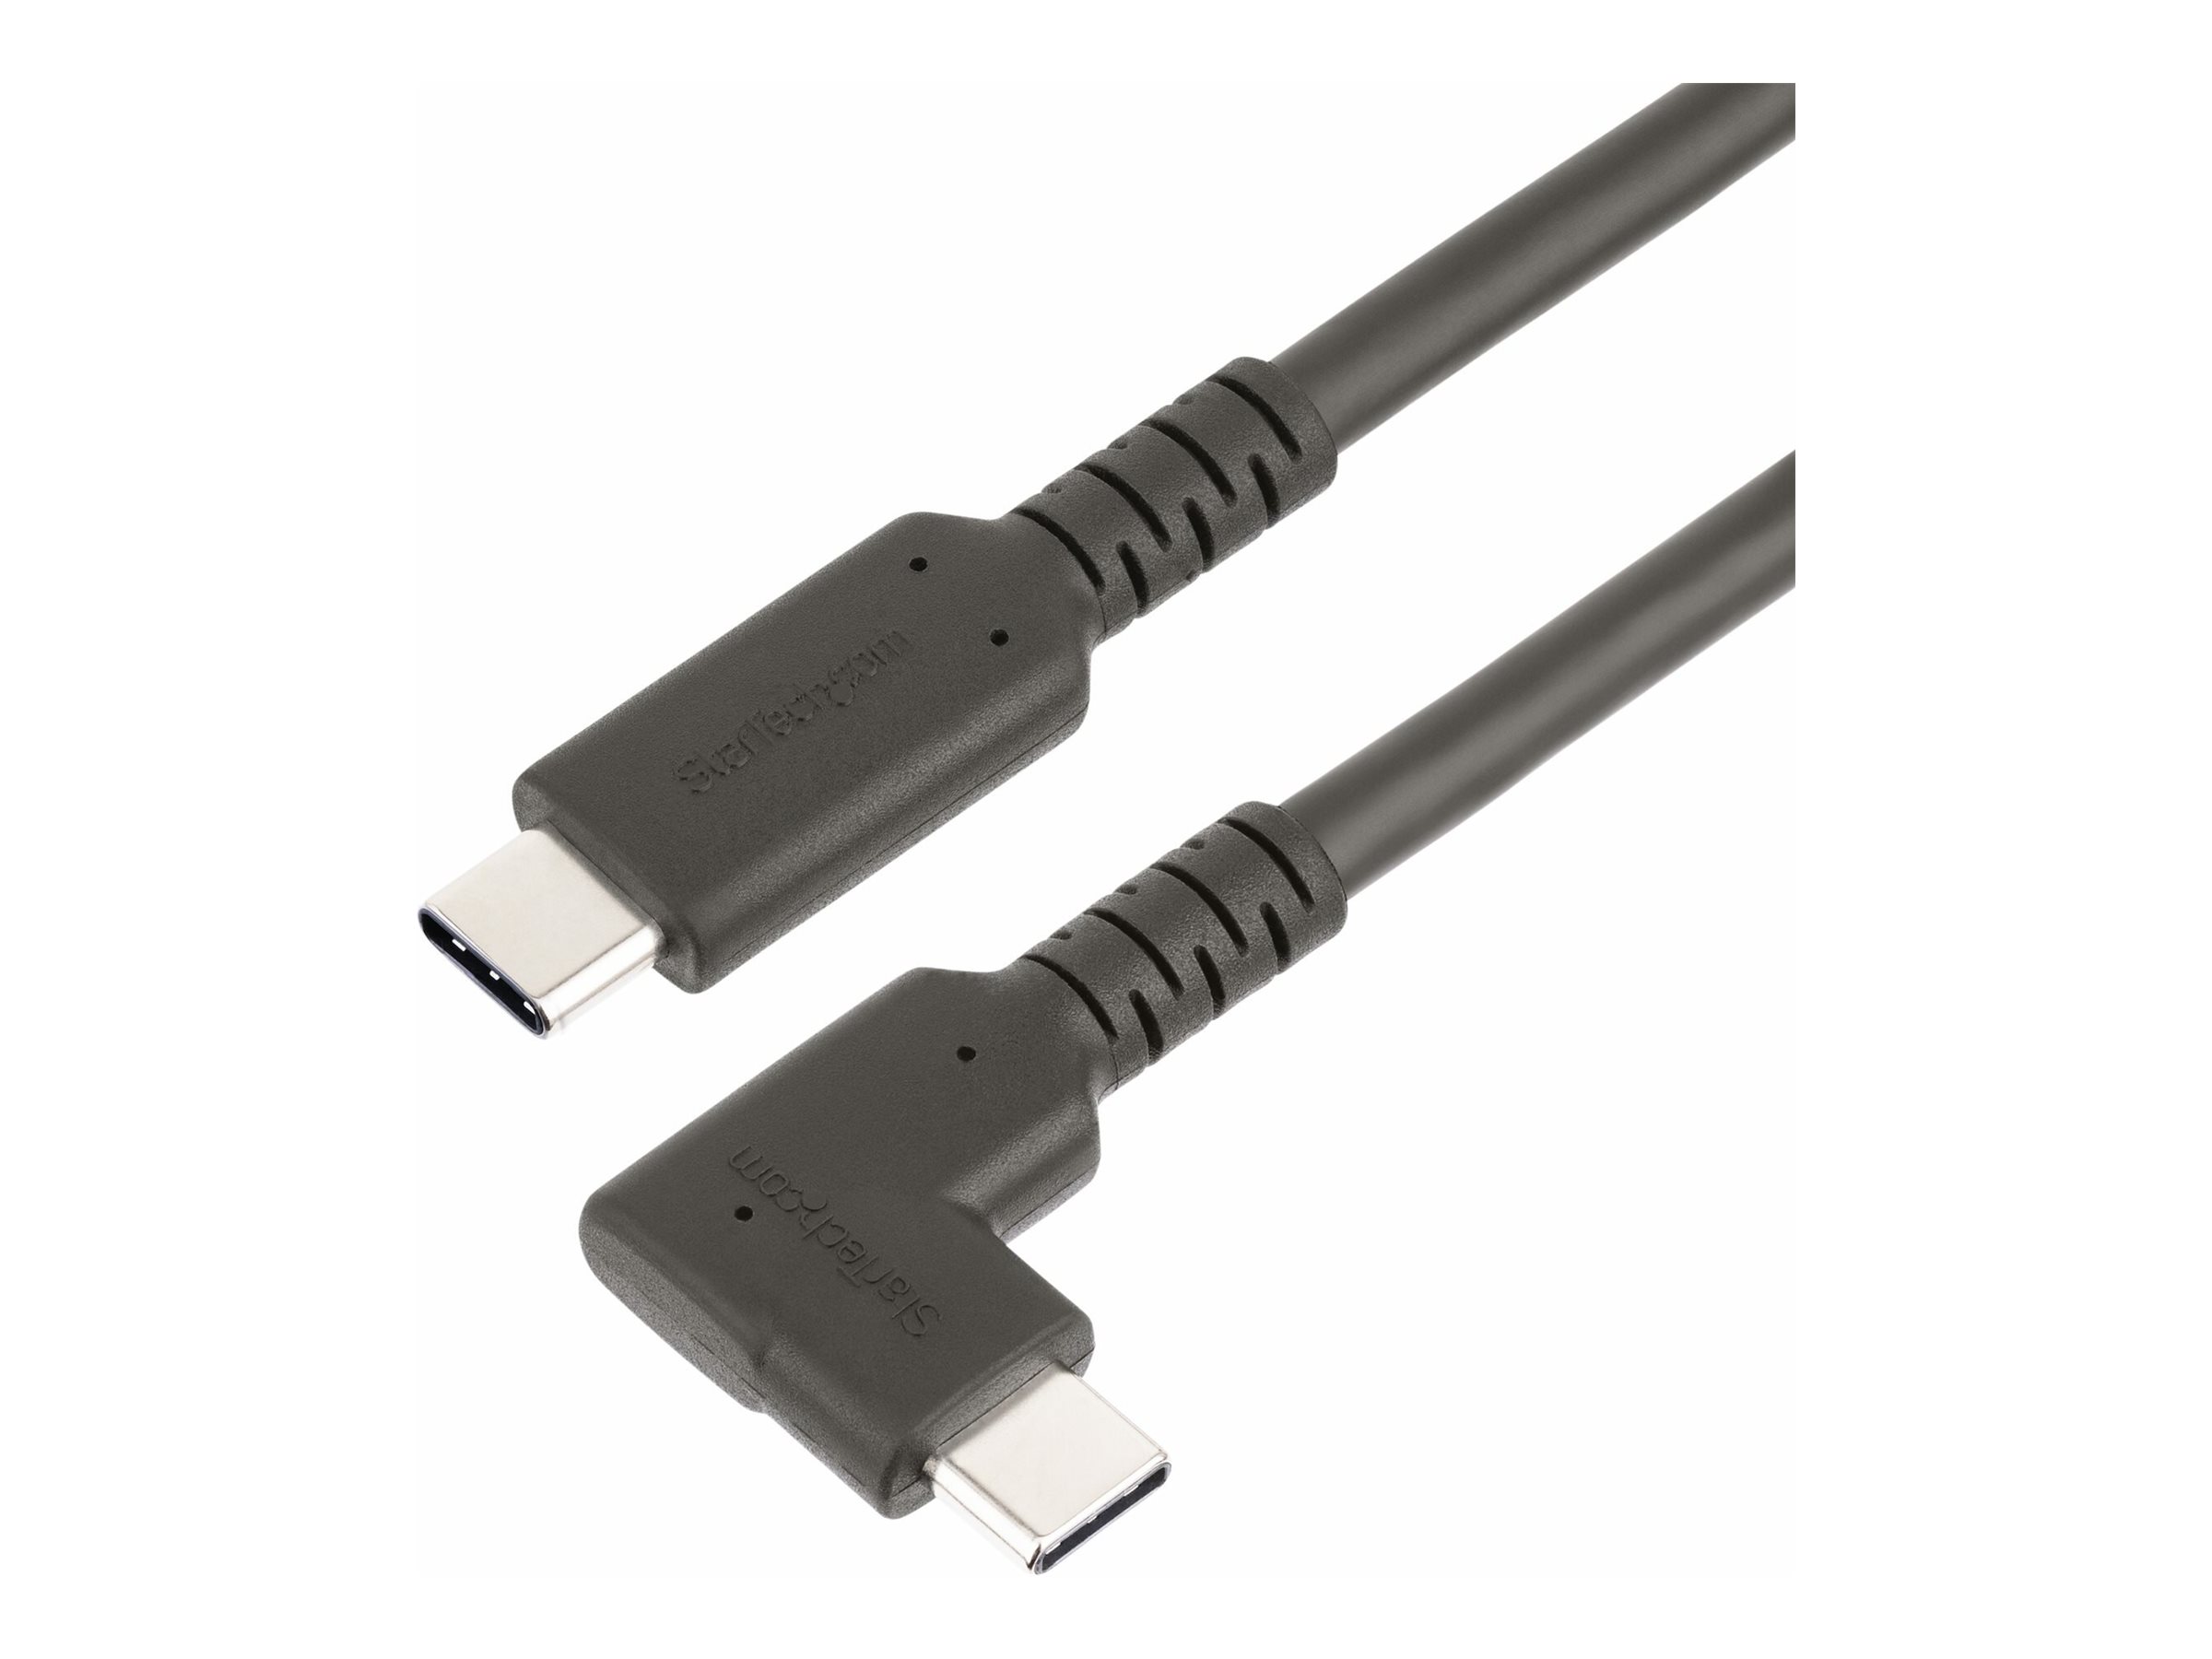 StarTech.com 1.6ft (50cm) Rugged Right Angle USB-C Cable, USB 3.2 Gen 2 (10 Gbps), USB C to C Data Transfer Cable, 4K 60Hz DP Alt Mode, 100W Power Delivery - 90 Degree USB-C Cable (RUSB31CC50CMBR) - Câble USB - 24 pin USB-C (M) droit pour 24 pin USB-C (M) angle droit - USB 3.2 Gen 2 - 50 cm - support pour 4K60Hz, robuste - noir - RUSB31CC50CMBR - Câbles USB